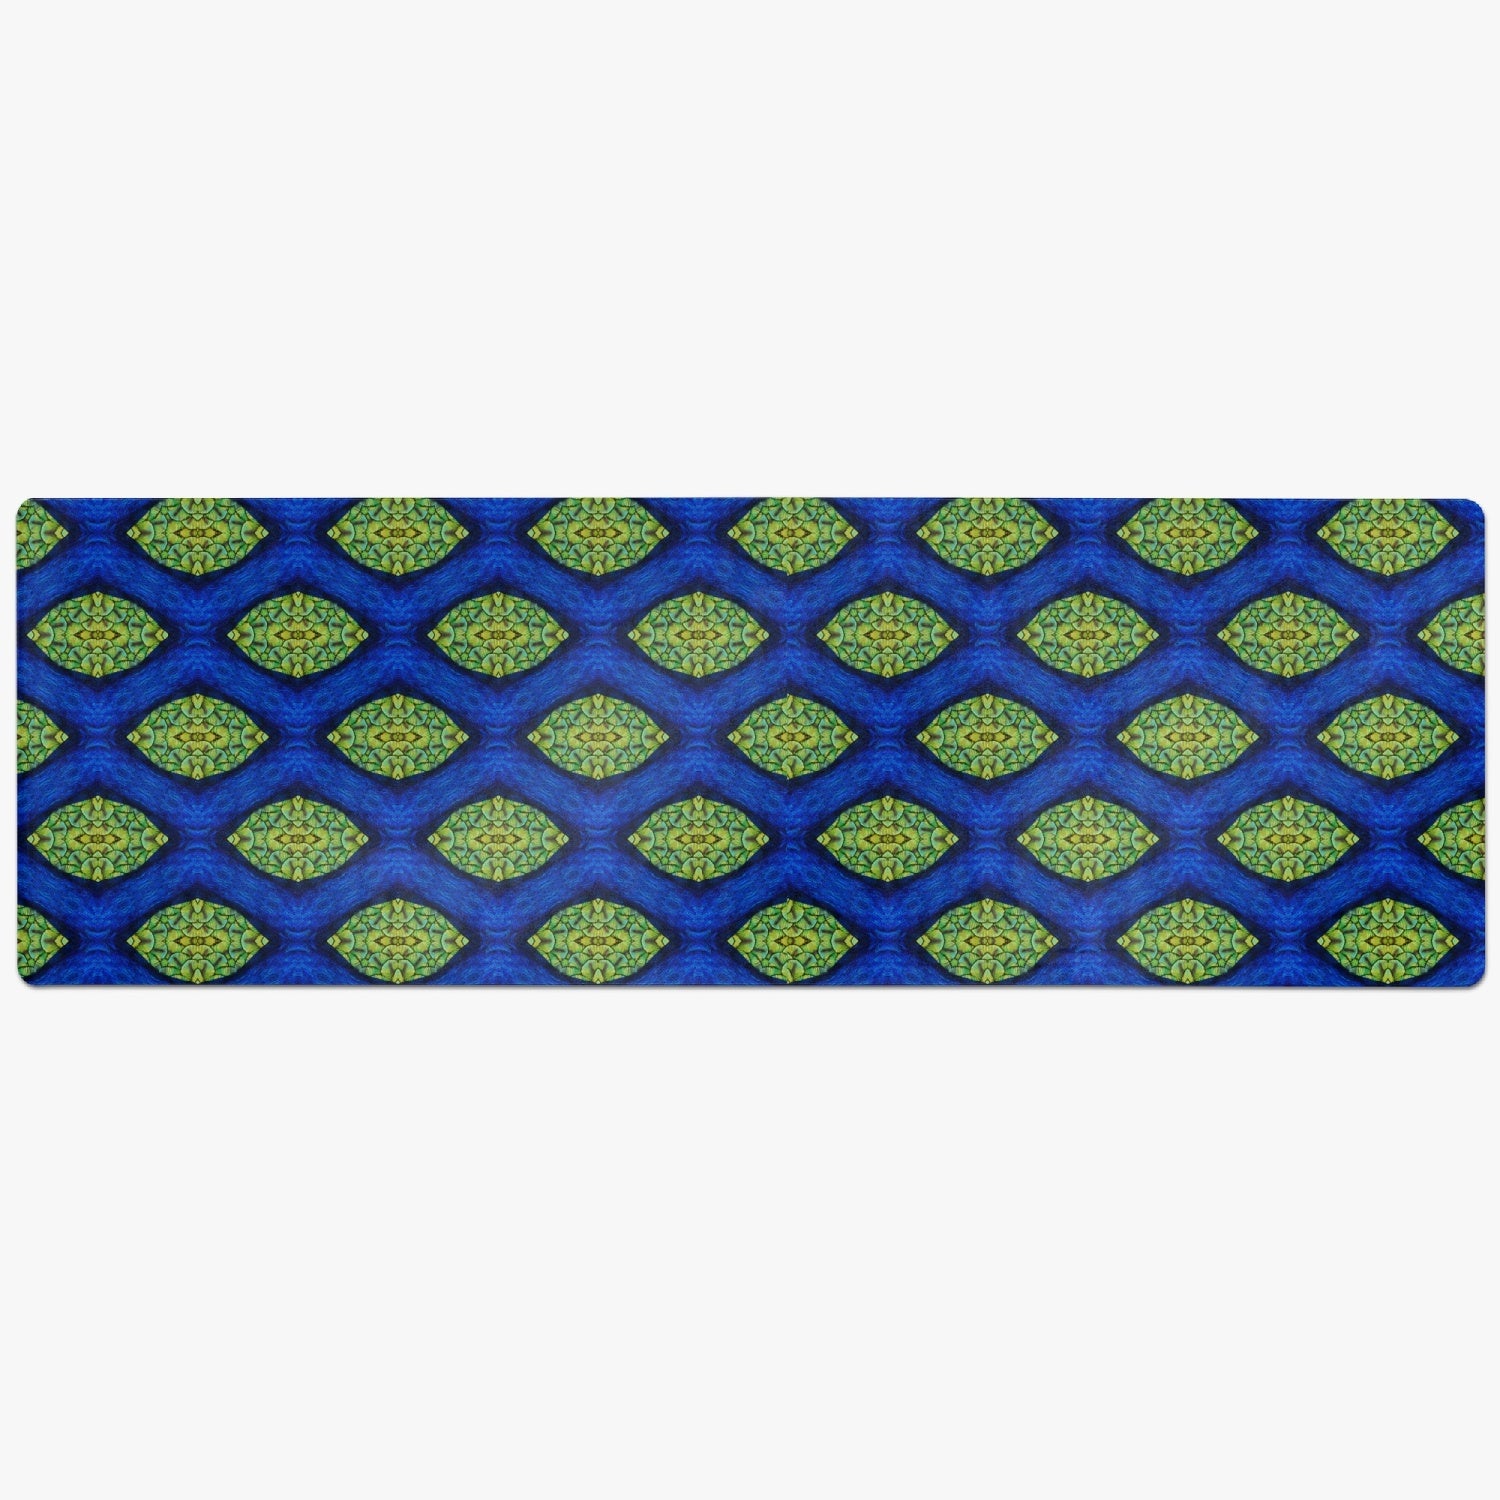 The Heart and Brain Connection  Suede Anti-slip Yoga Mat, by Sensus Stduio Design